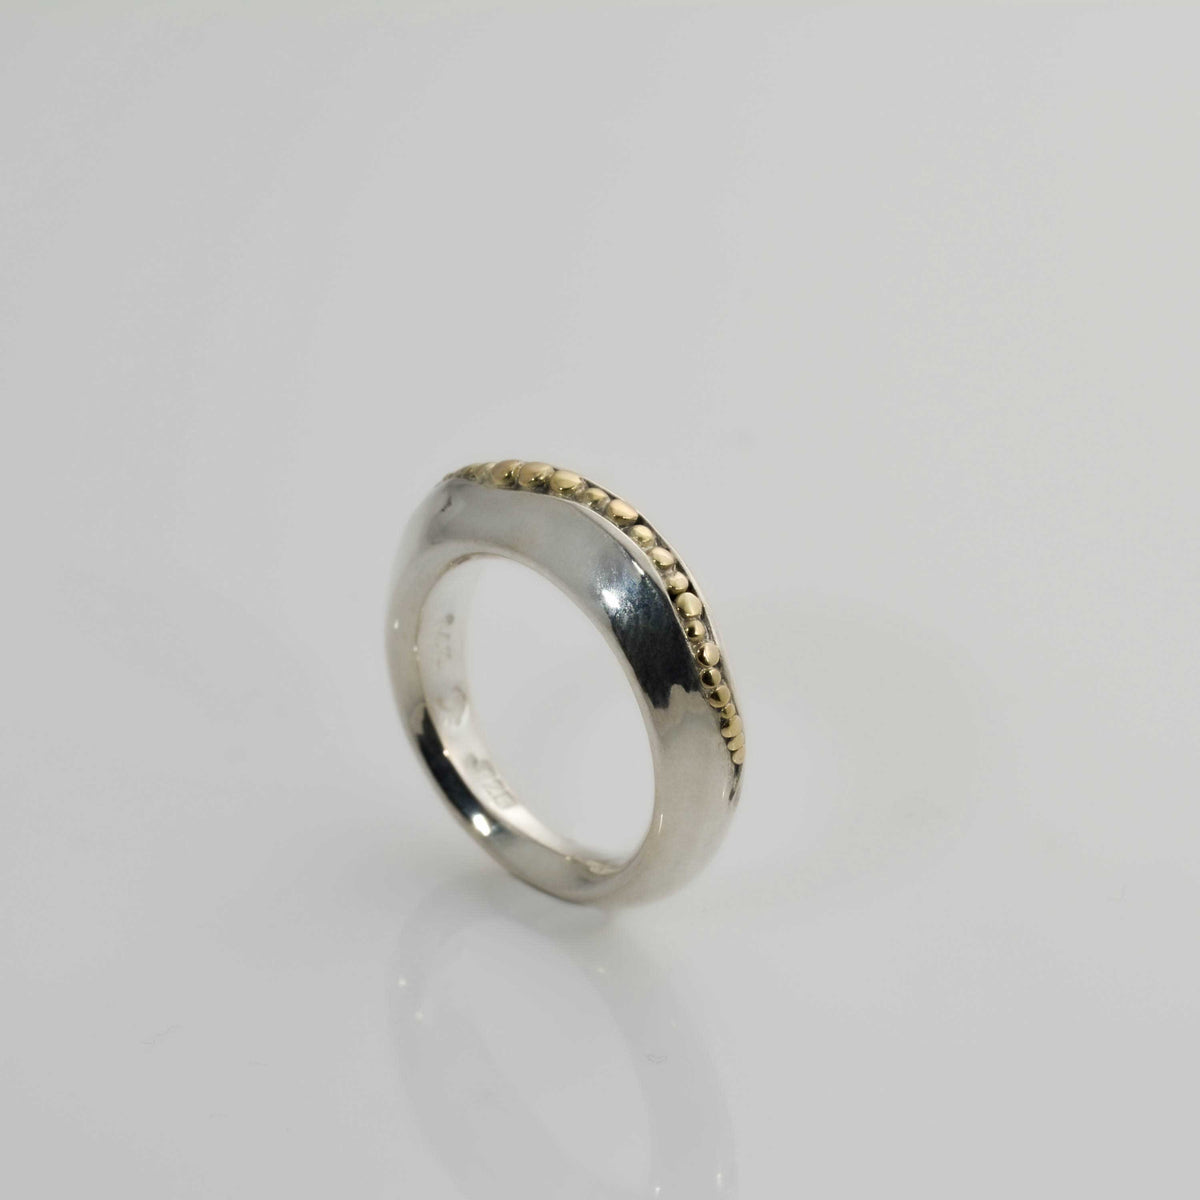 &quot;Golden Spheres: A Unique and Elegant Sterling Silver Ring with 14K Gold Accents&quot;